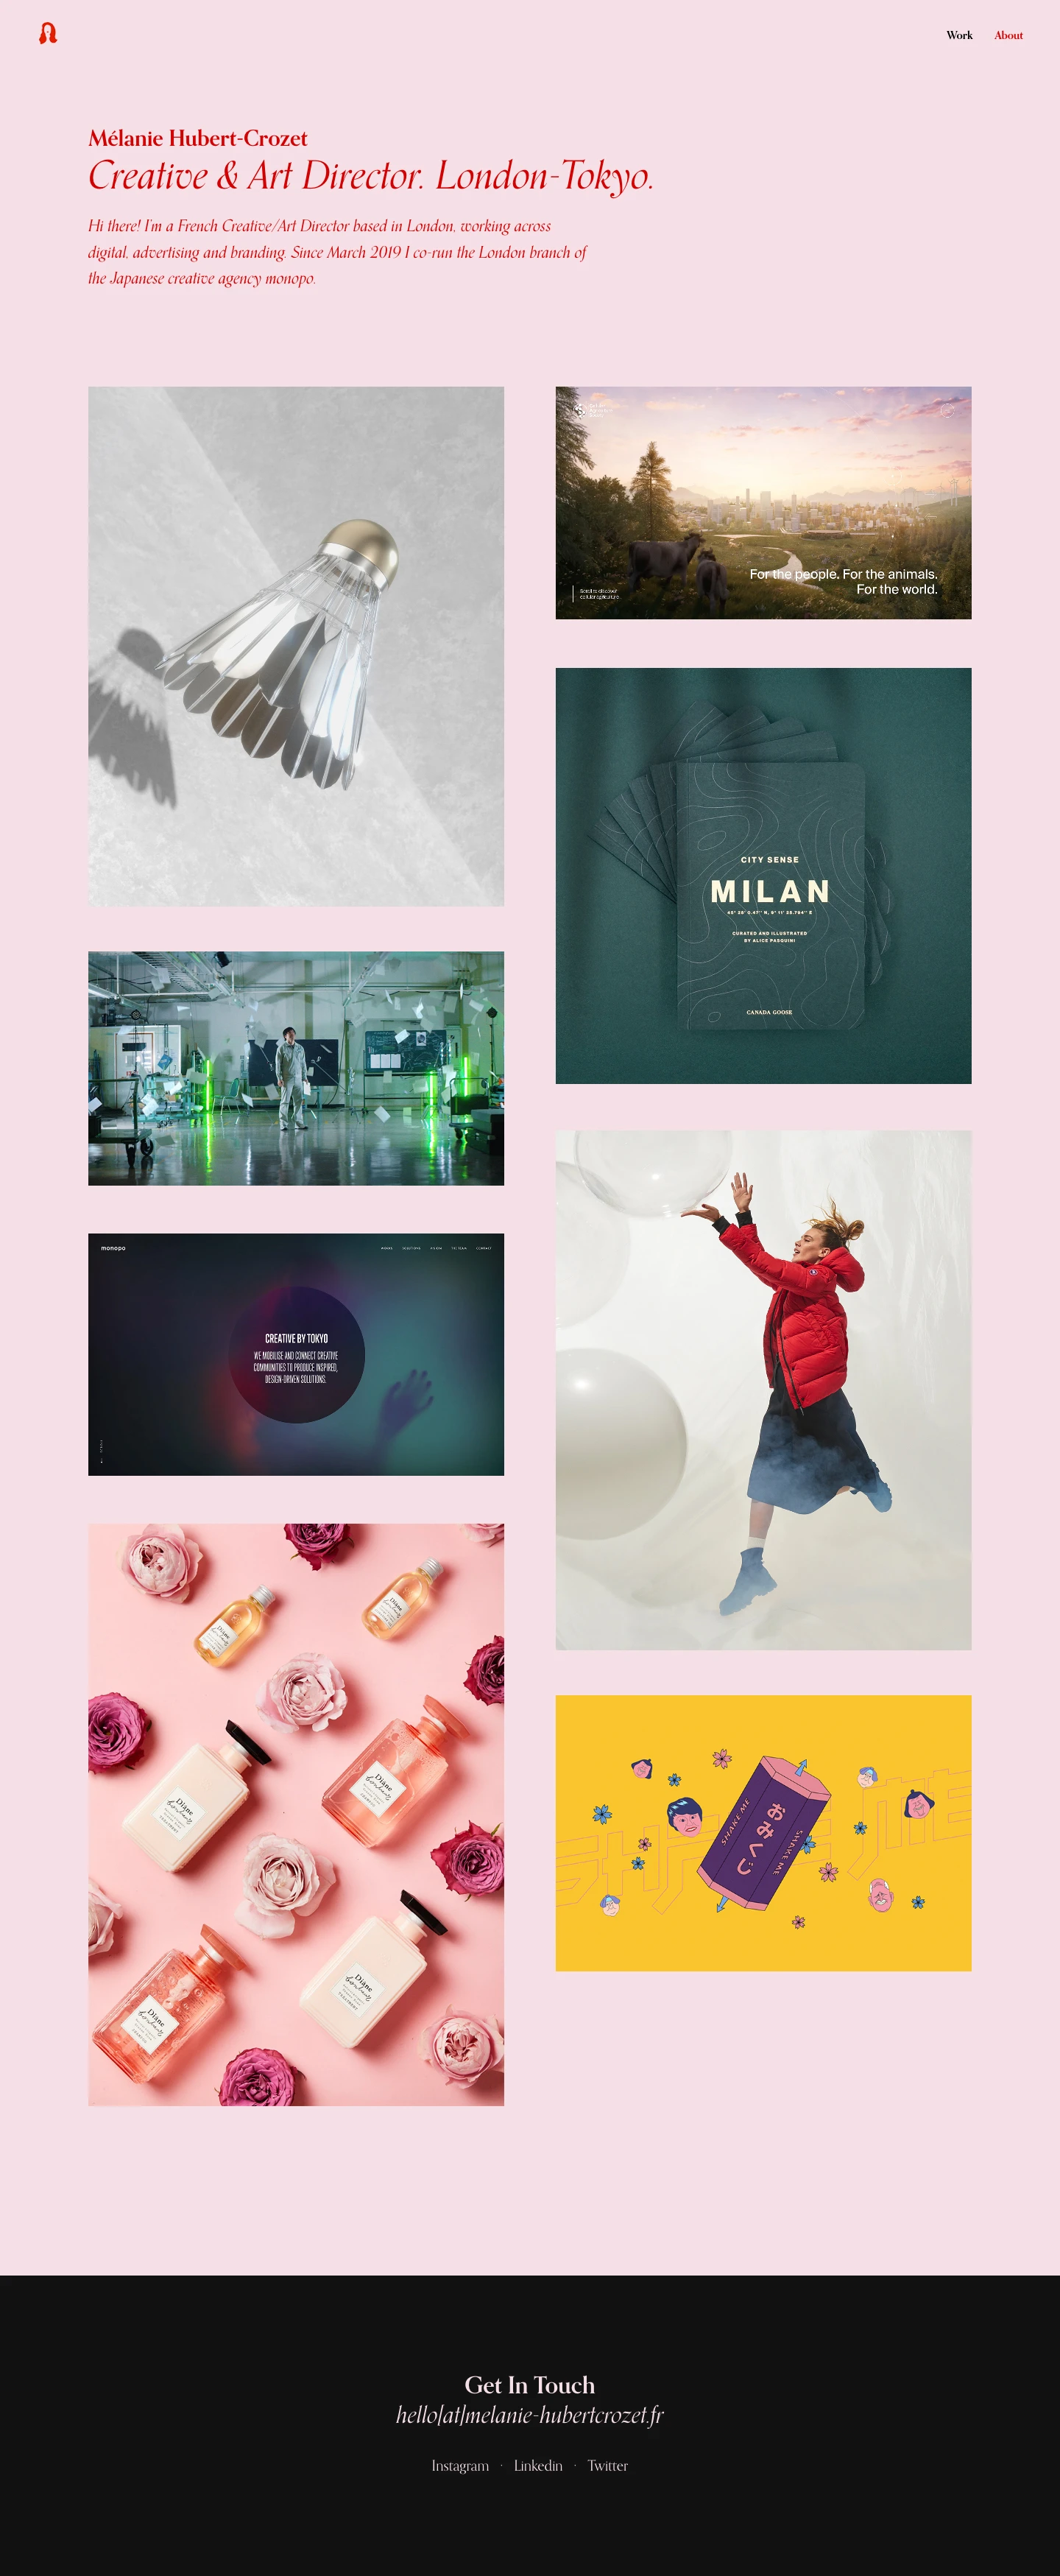 Mélanie Hubert-Crozet Landing Page Example: I’m a French Creative/Art Director based in London, working across digital, advertising and branding. Since March 2019 I co-run the London branch of the Japanese creative agency monopo. 